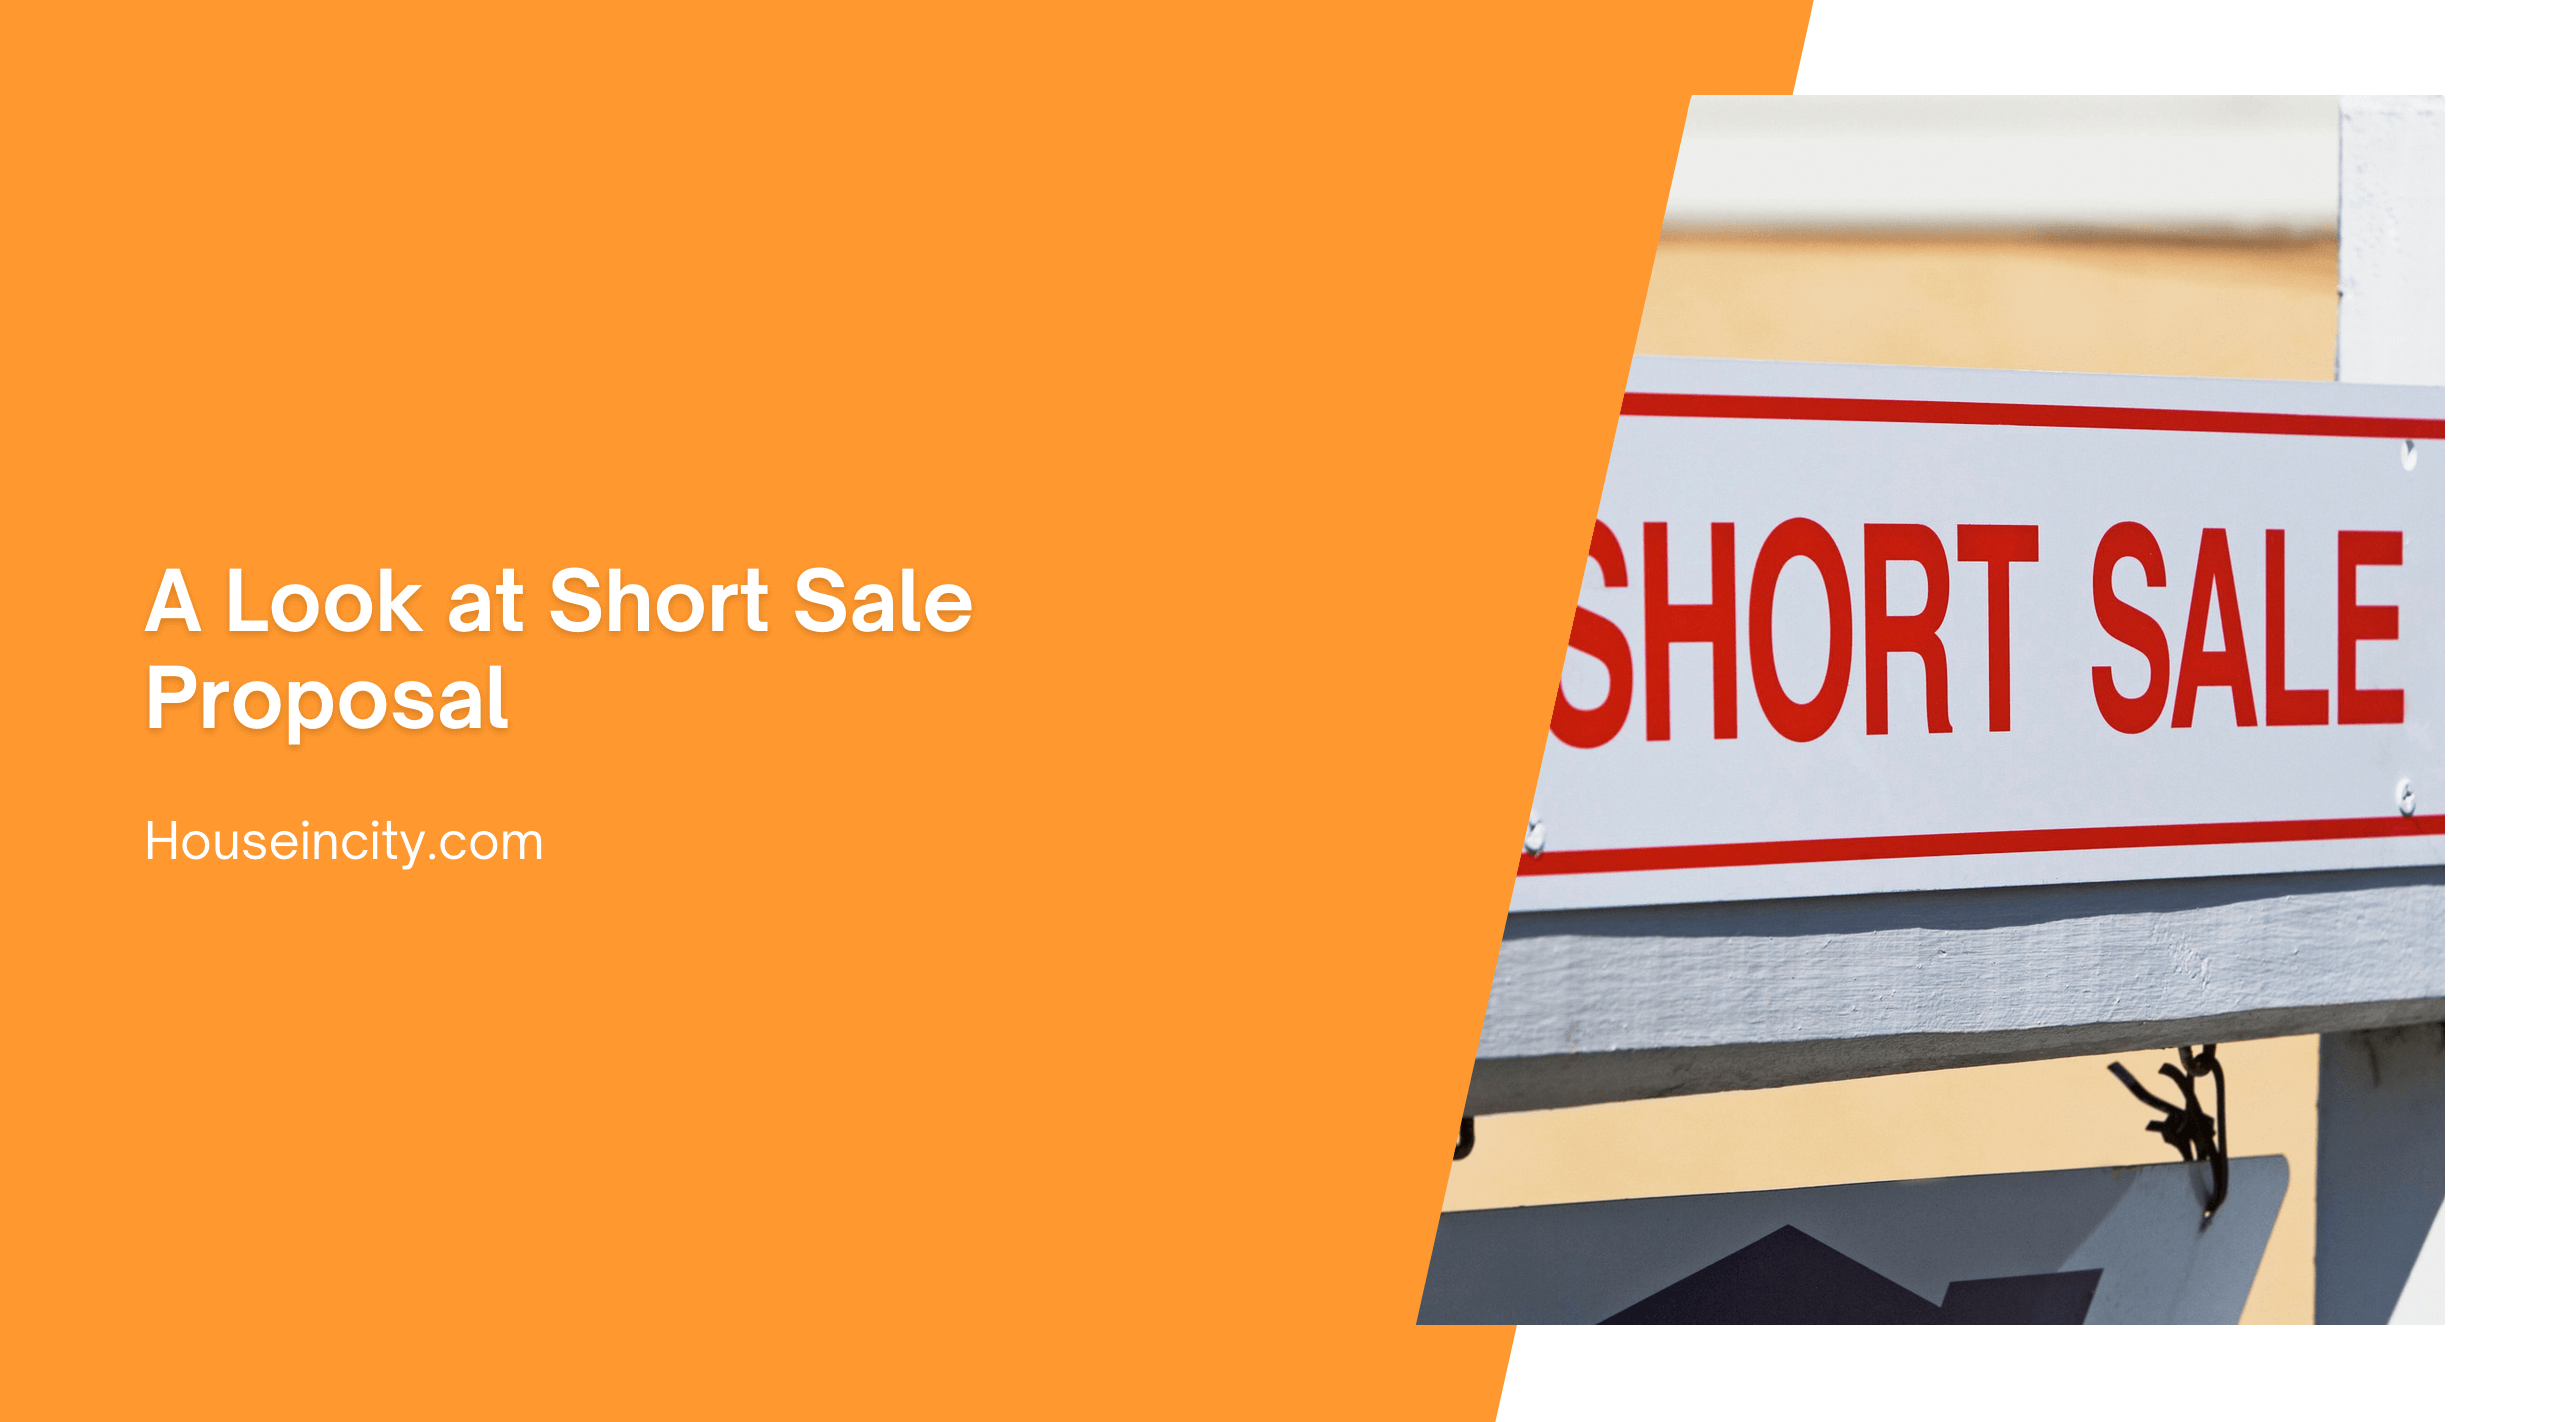 A Look at Short Sale Proposal